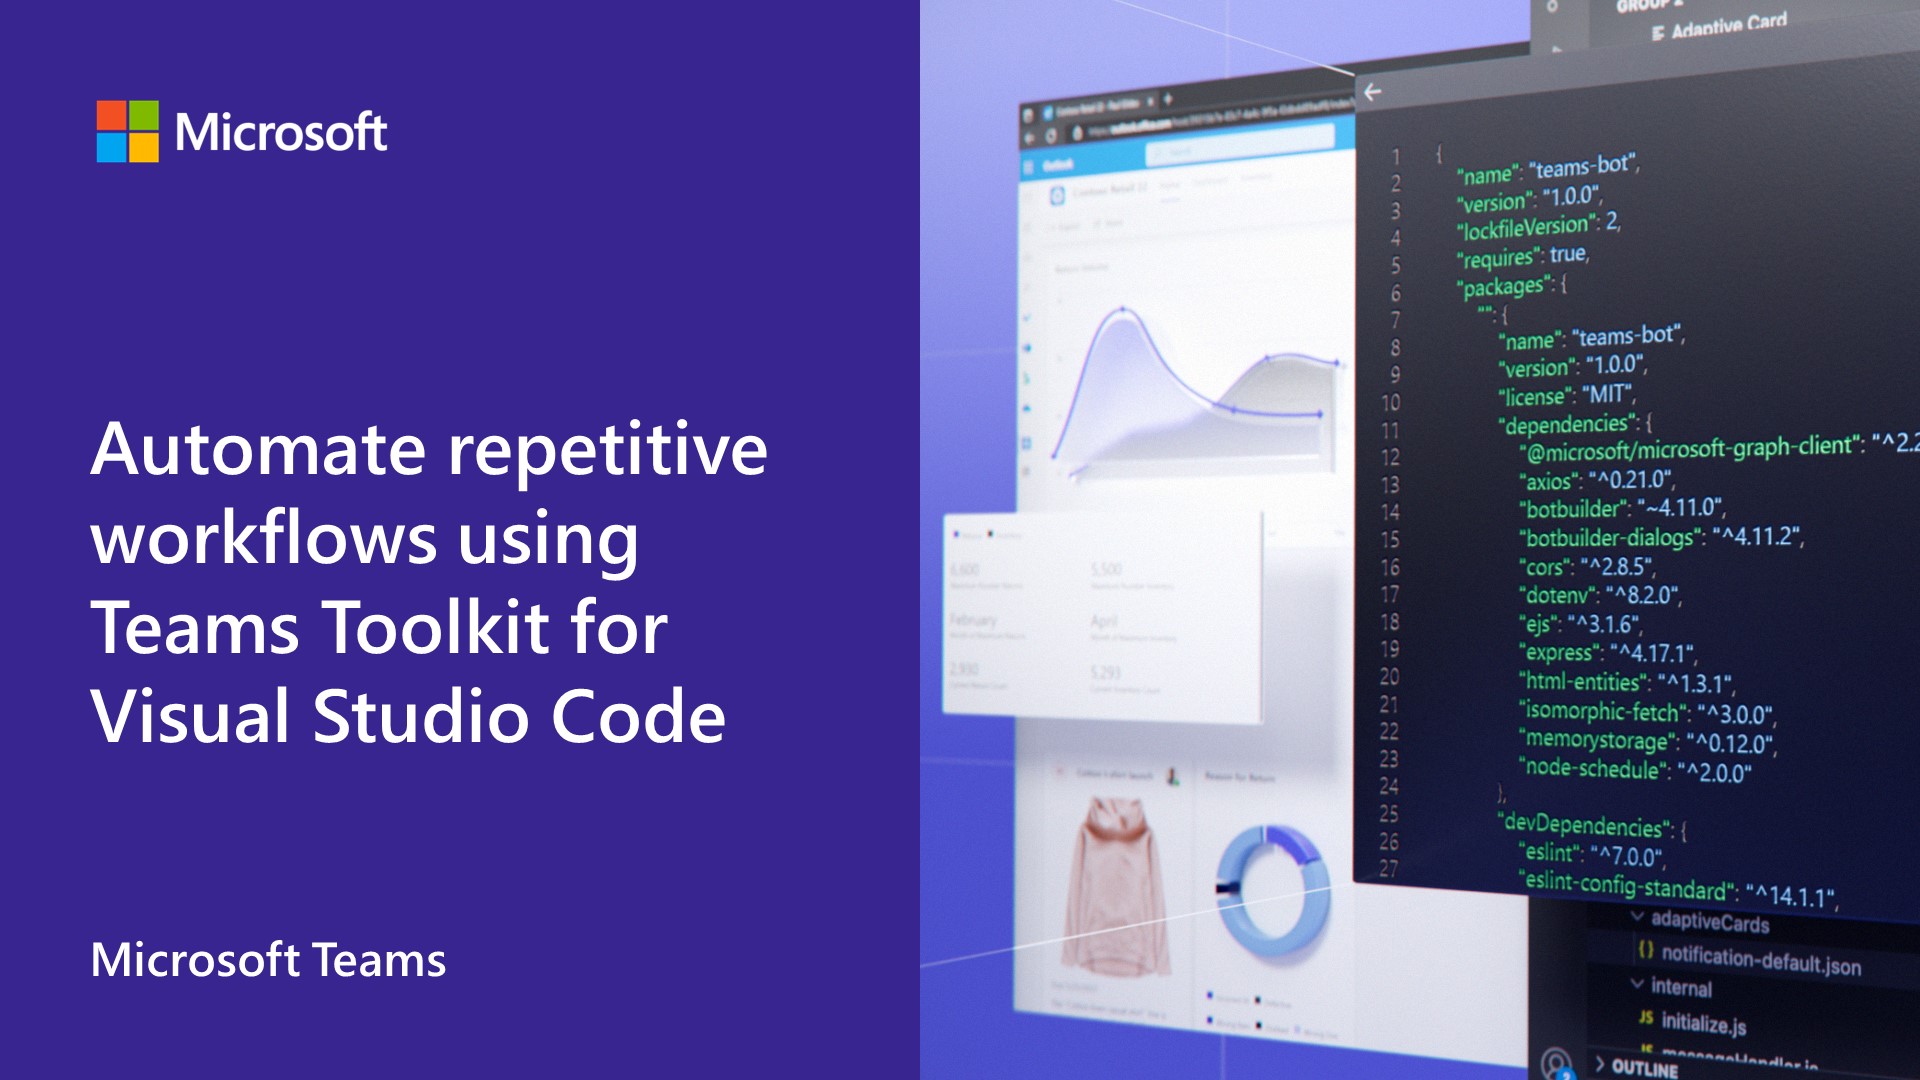 Build bots to automate repetitive workflows using Teams Toolkit for Visual Studio Code